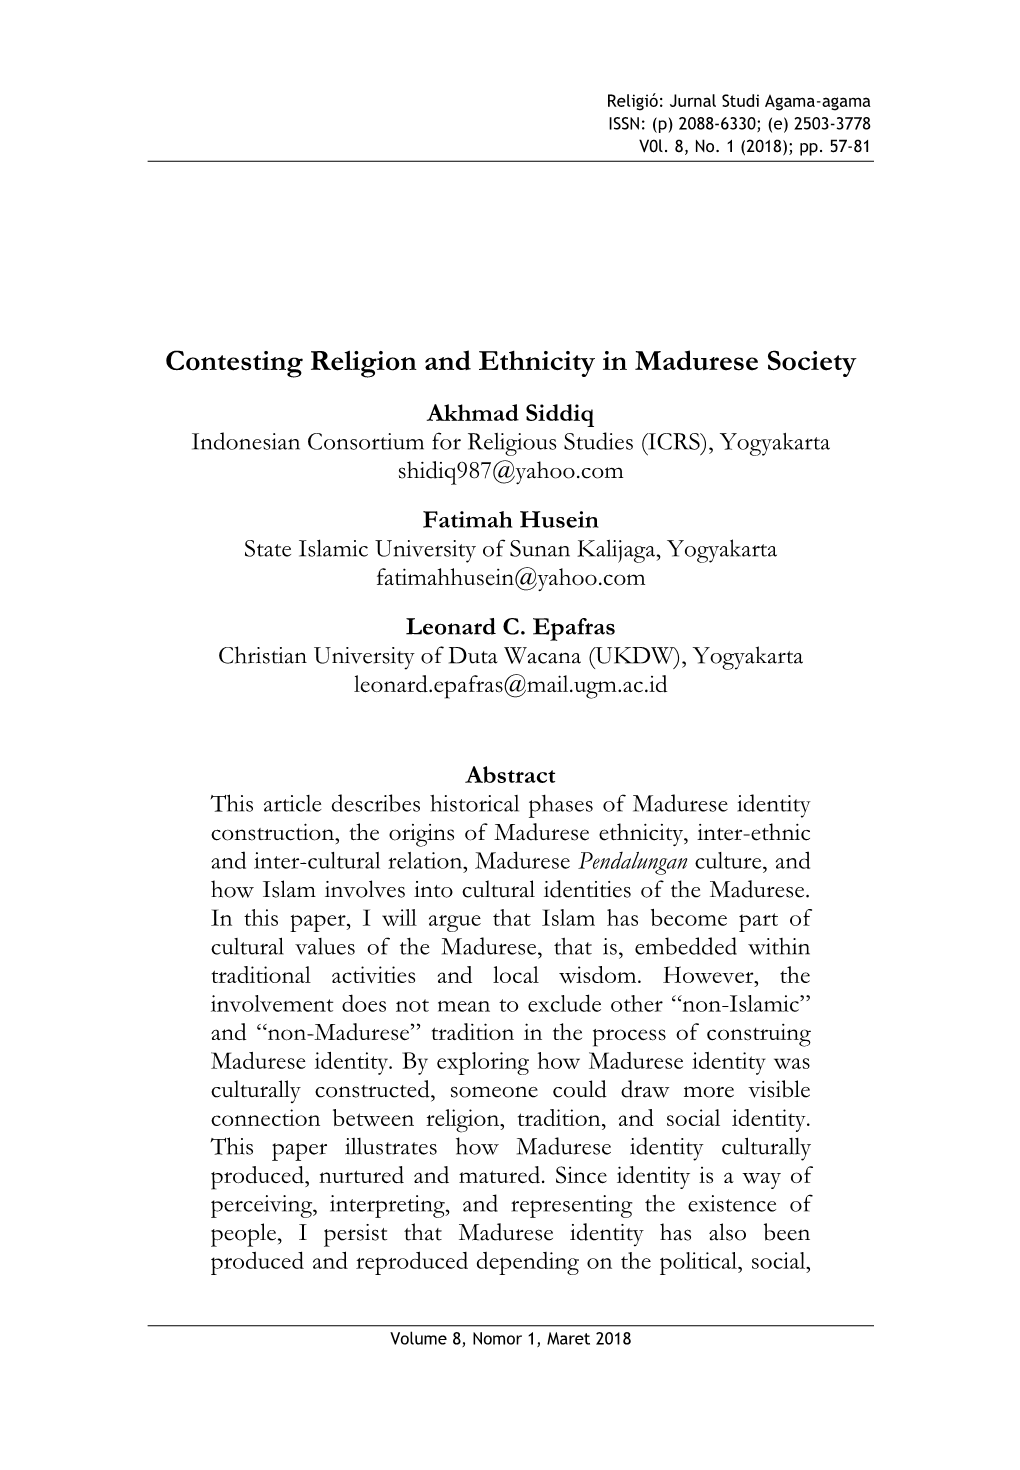 Contesting Religion and Ethnicity in Madurese Society